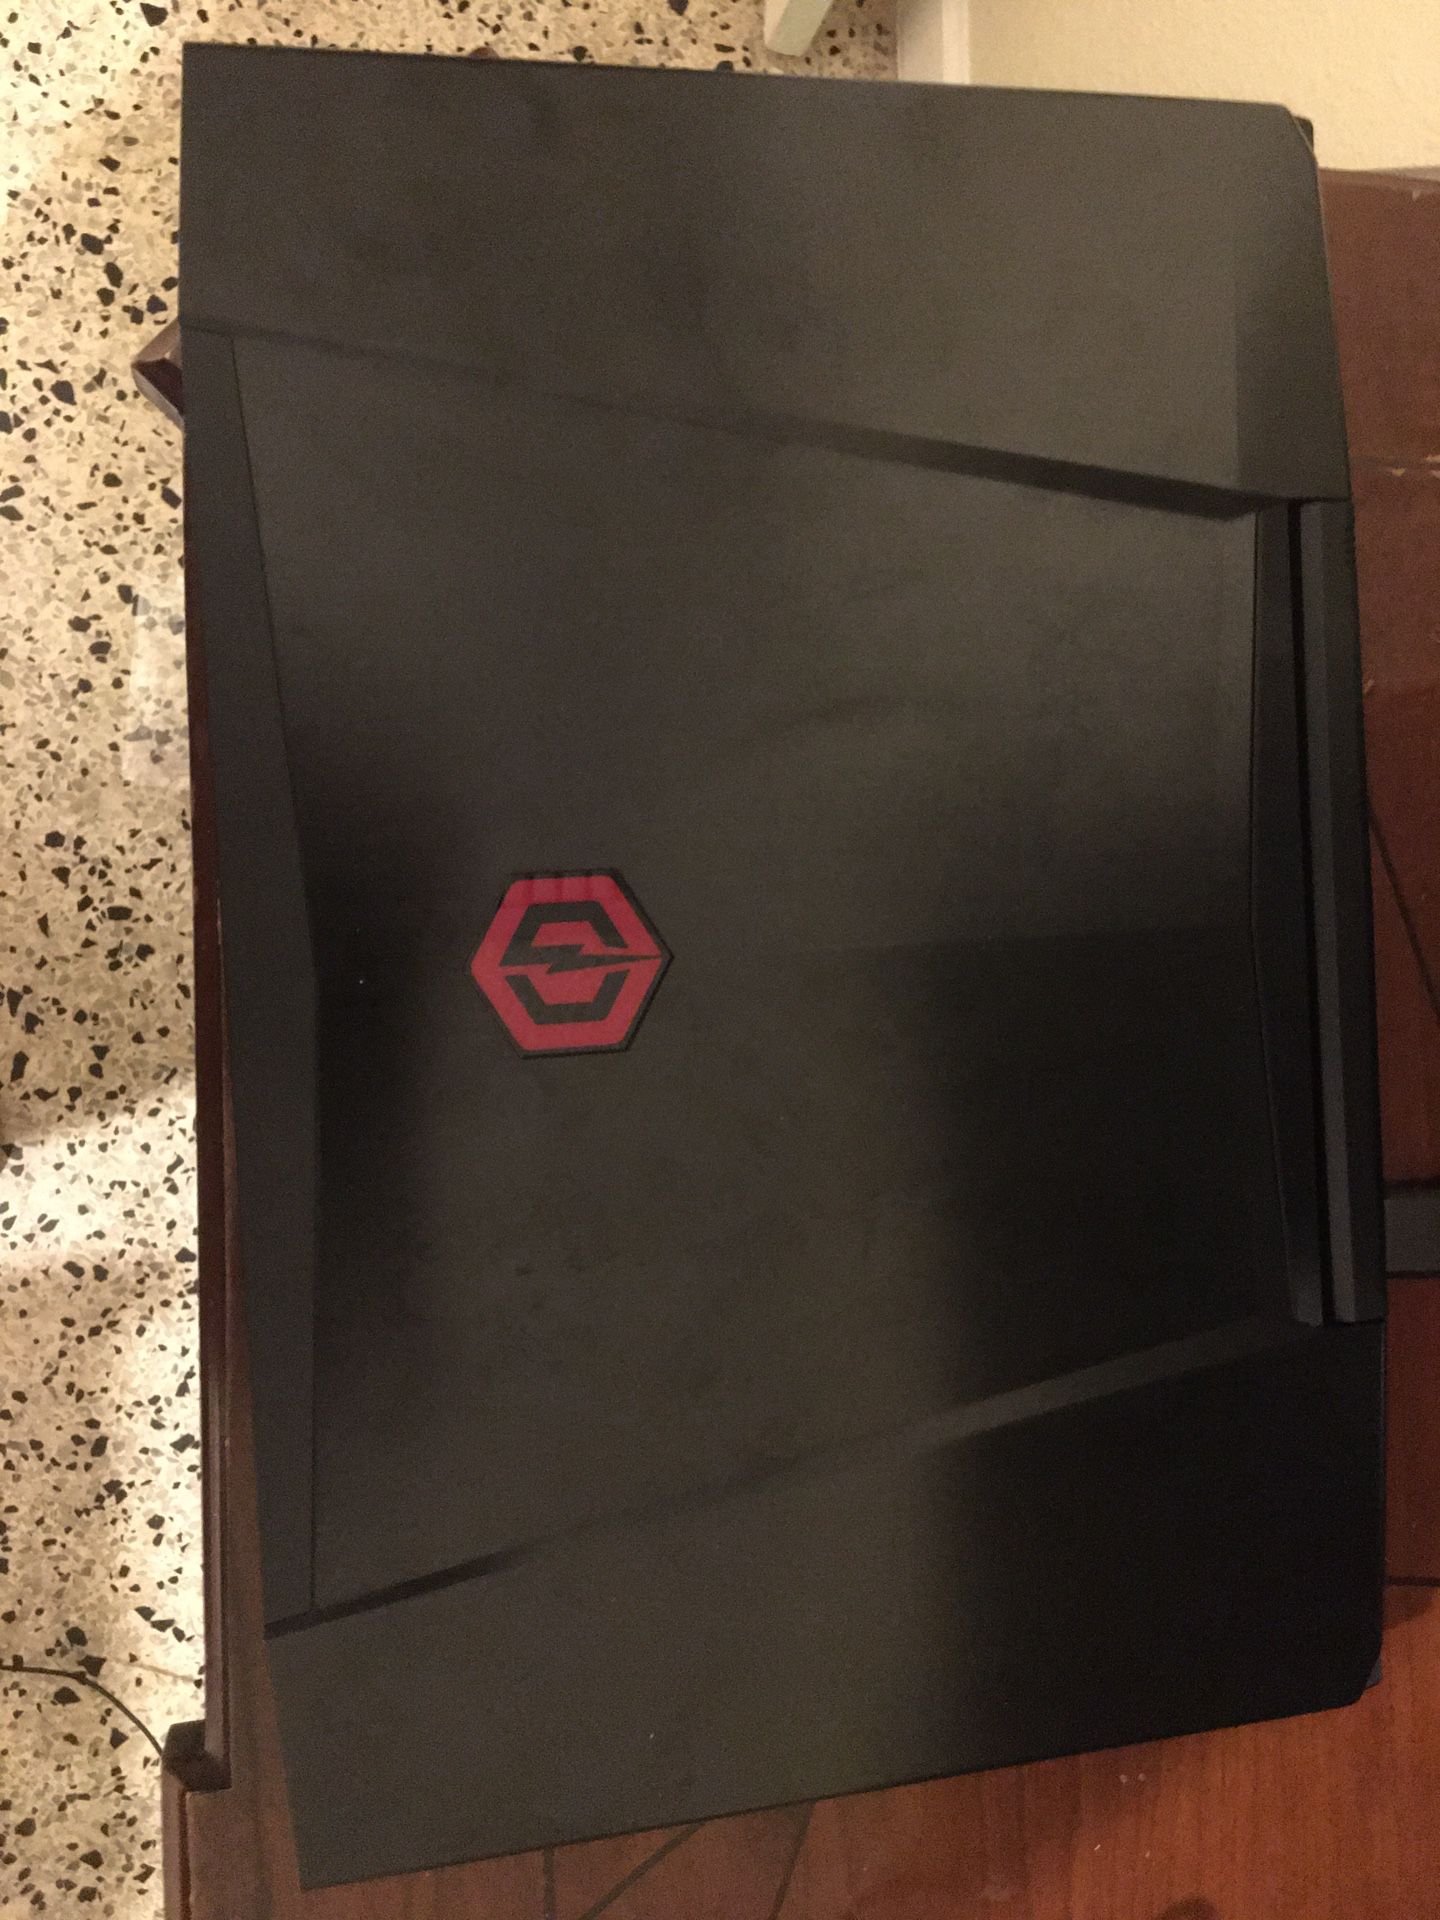 CyberPowerPC Gaming Laptop Tracer iii with GeForce GTX (OBO)